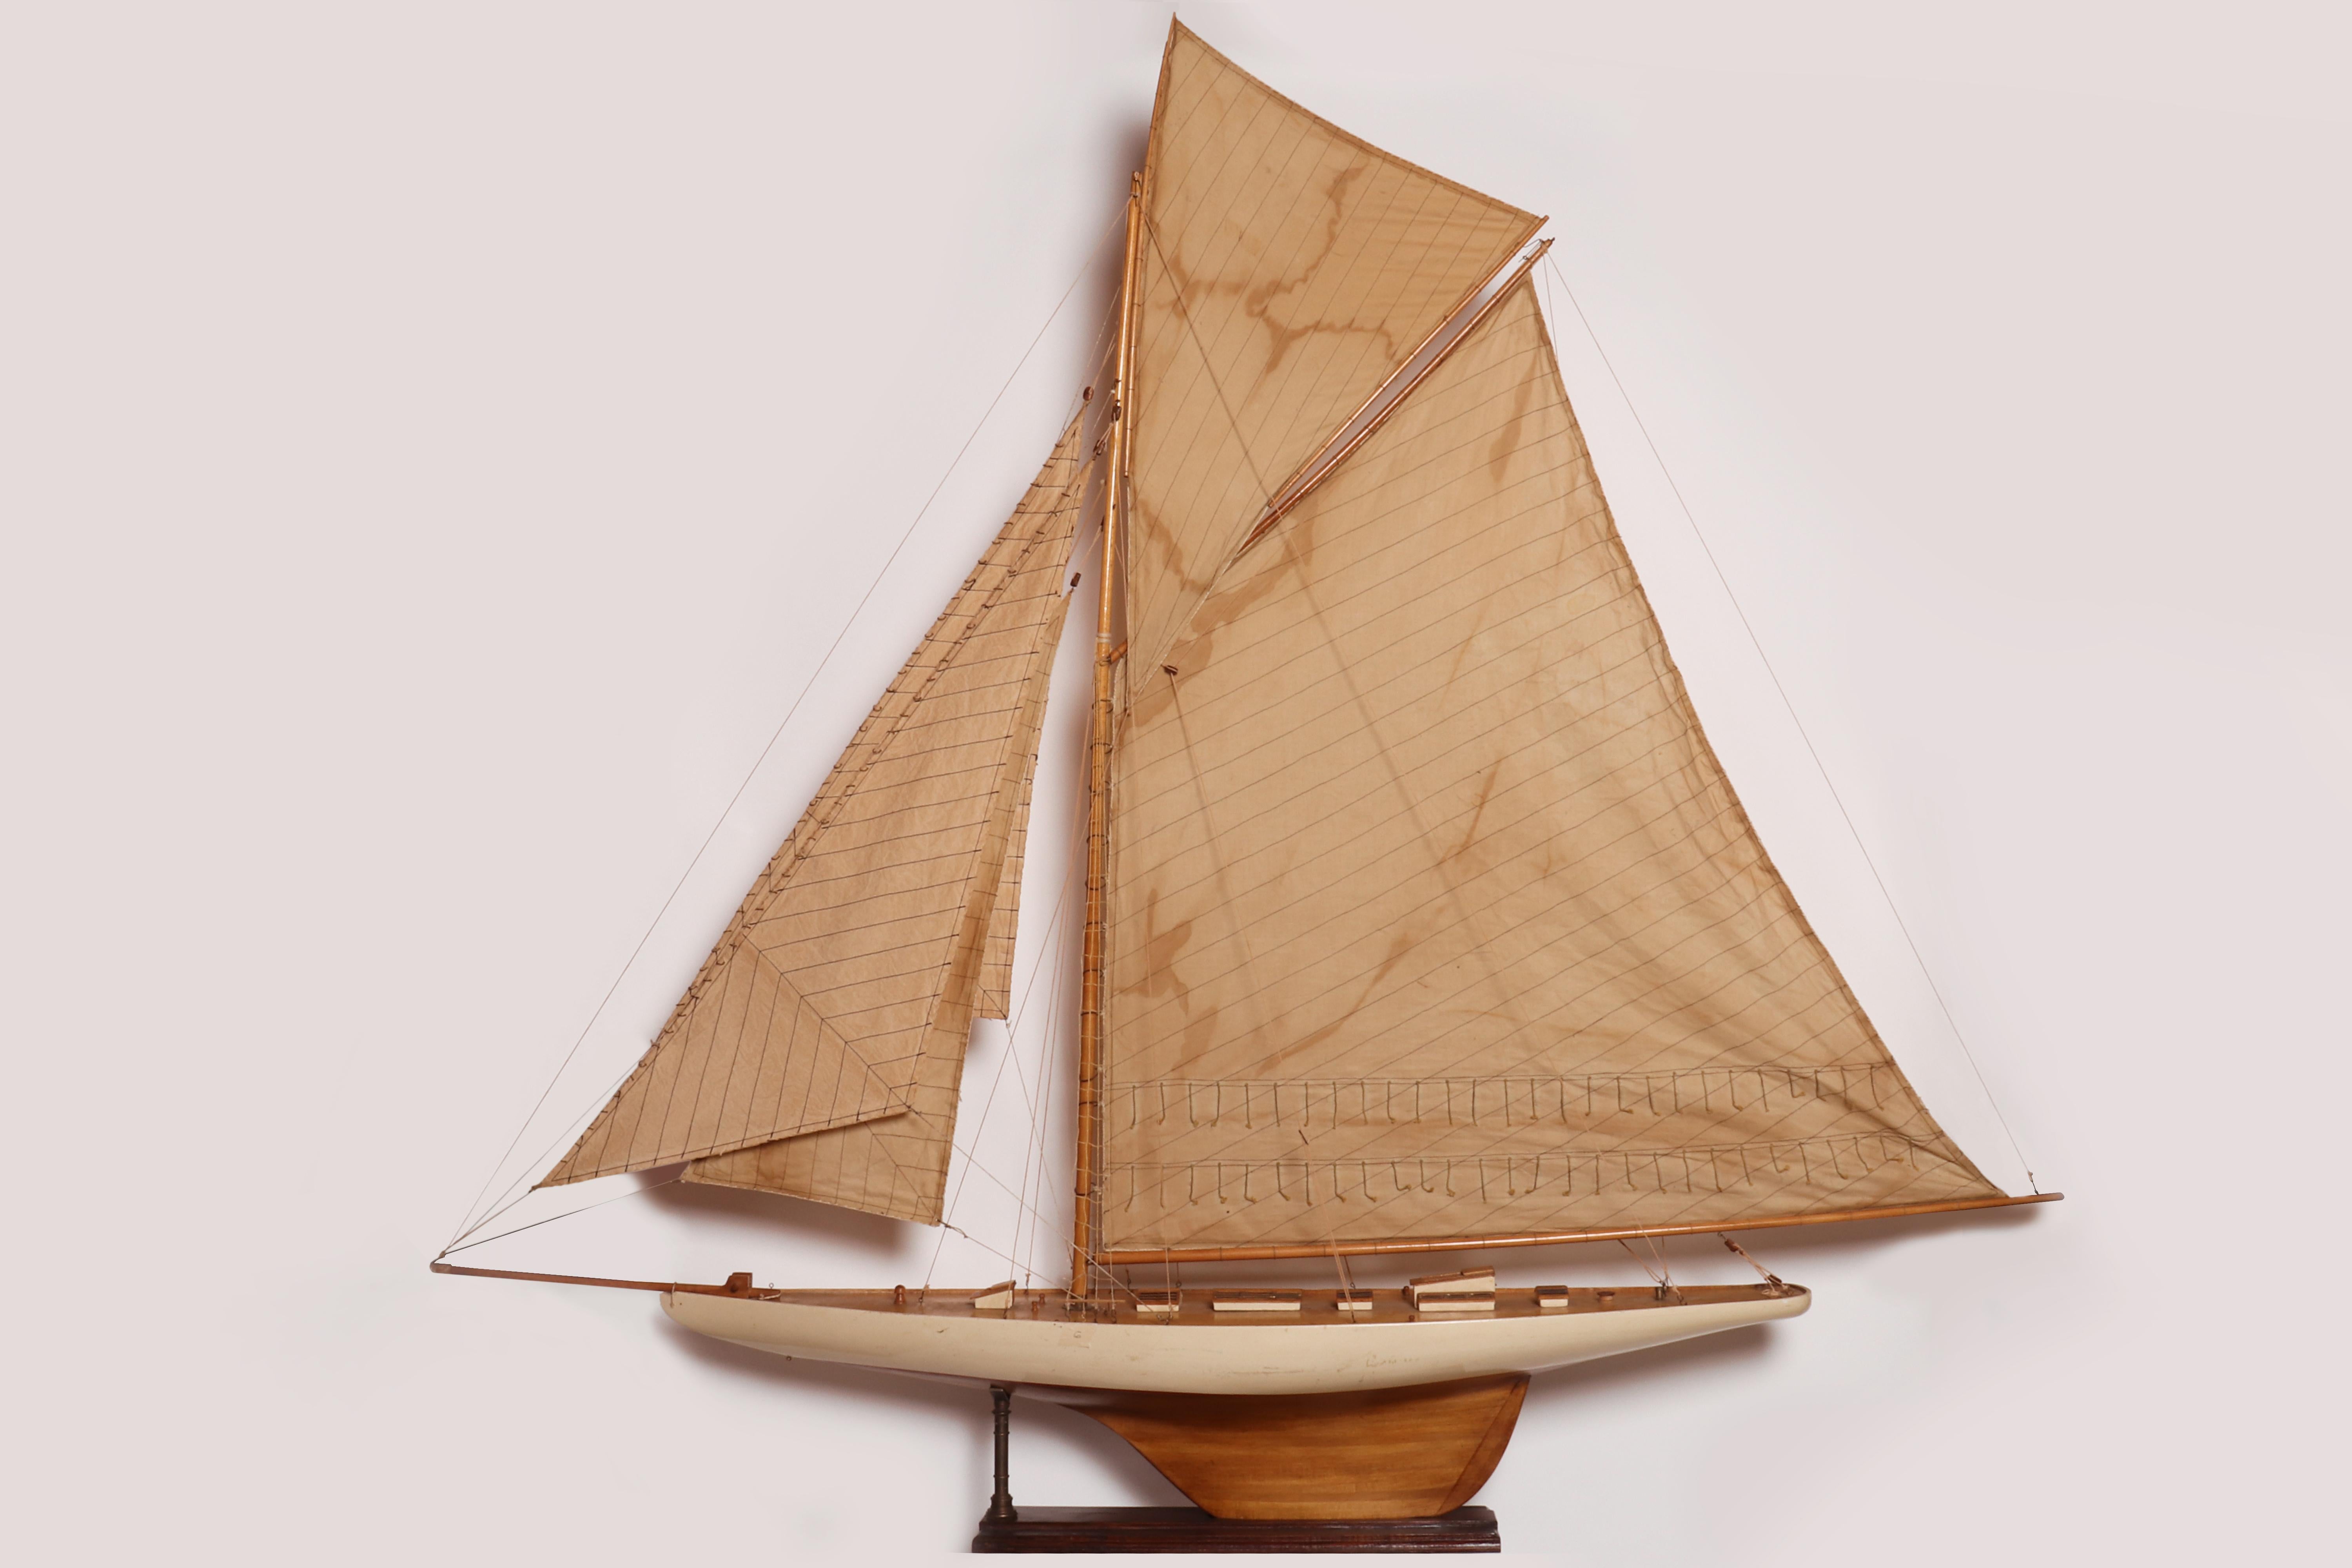 A rare model of a sailing boat according to the “Tuiga” (Giraf, built in United Kingdom in 1909), one of the few sailing yachts in the 24-30 m. size range. Designed and built by the architect William Fife III for the 12th Duke of Medinaceli, Spain.